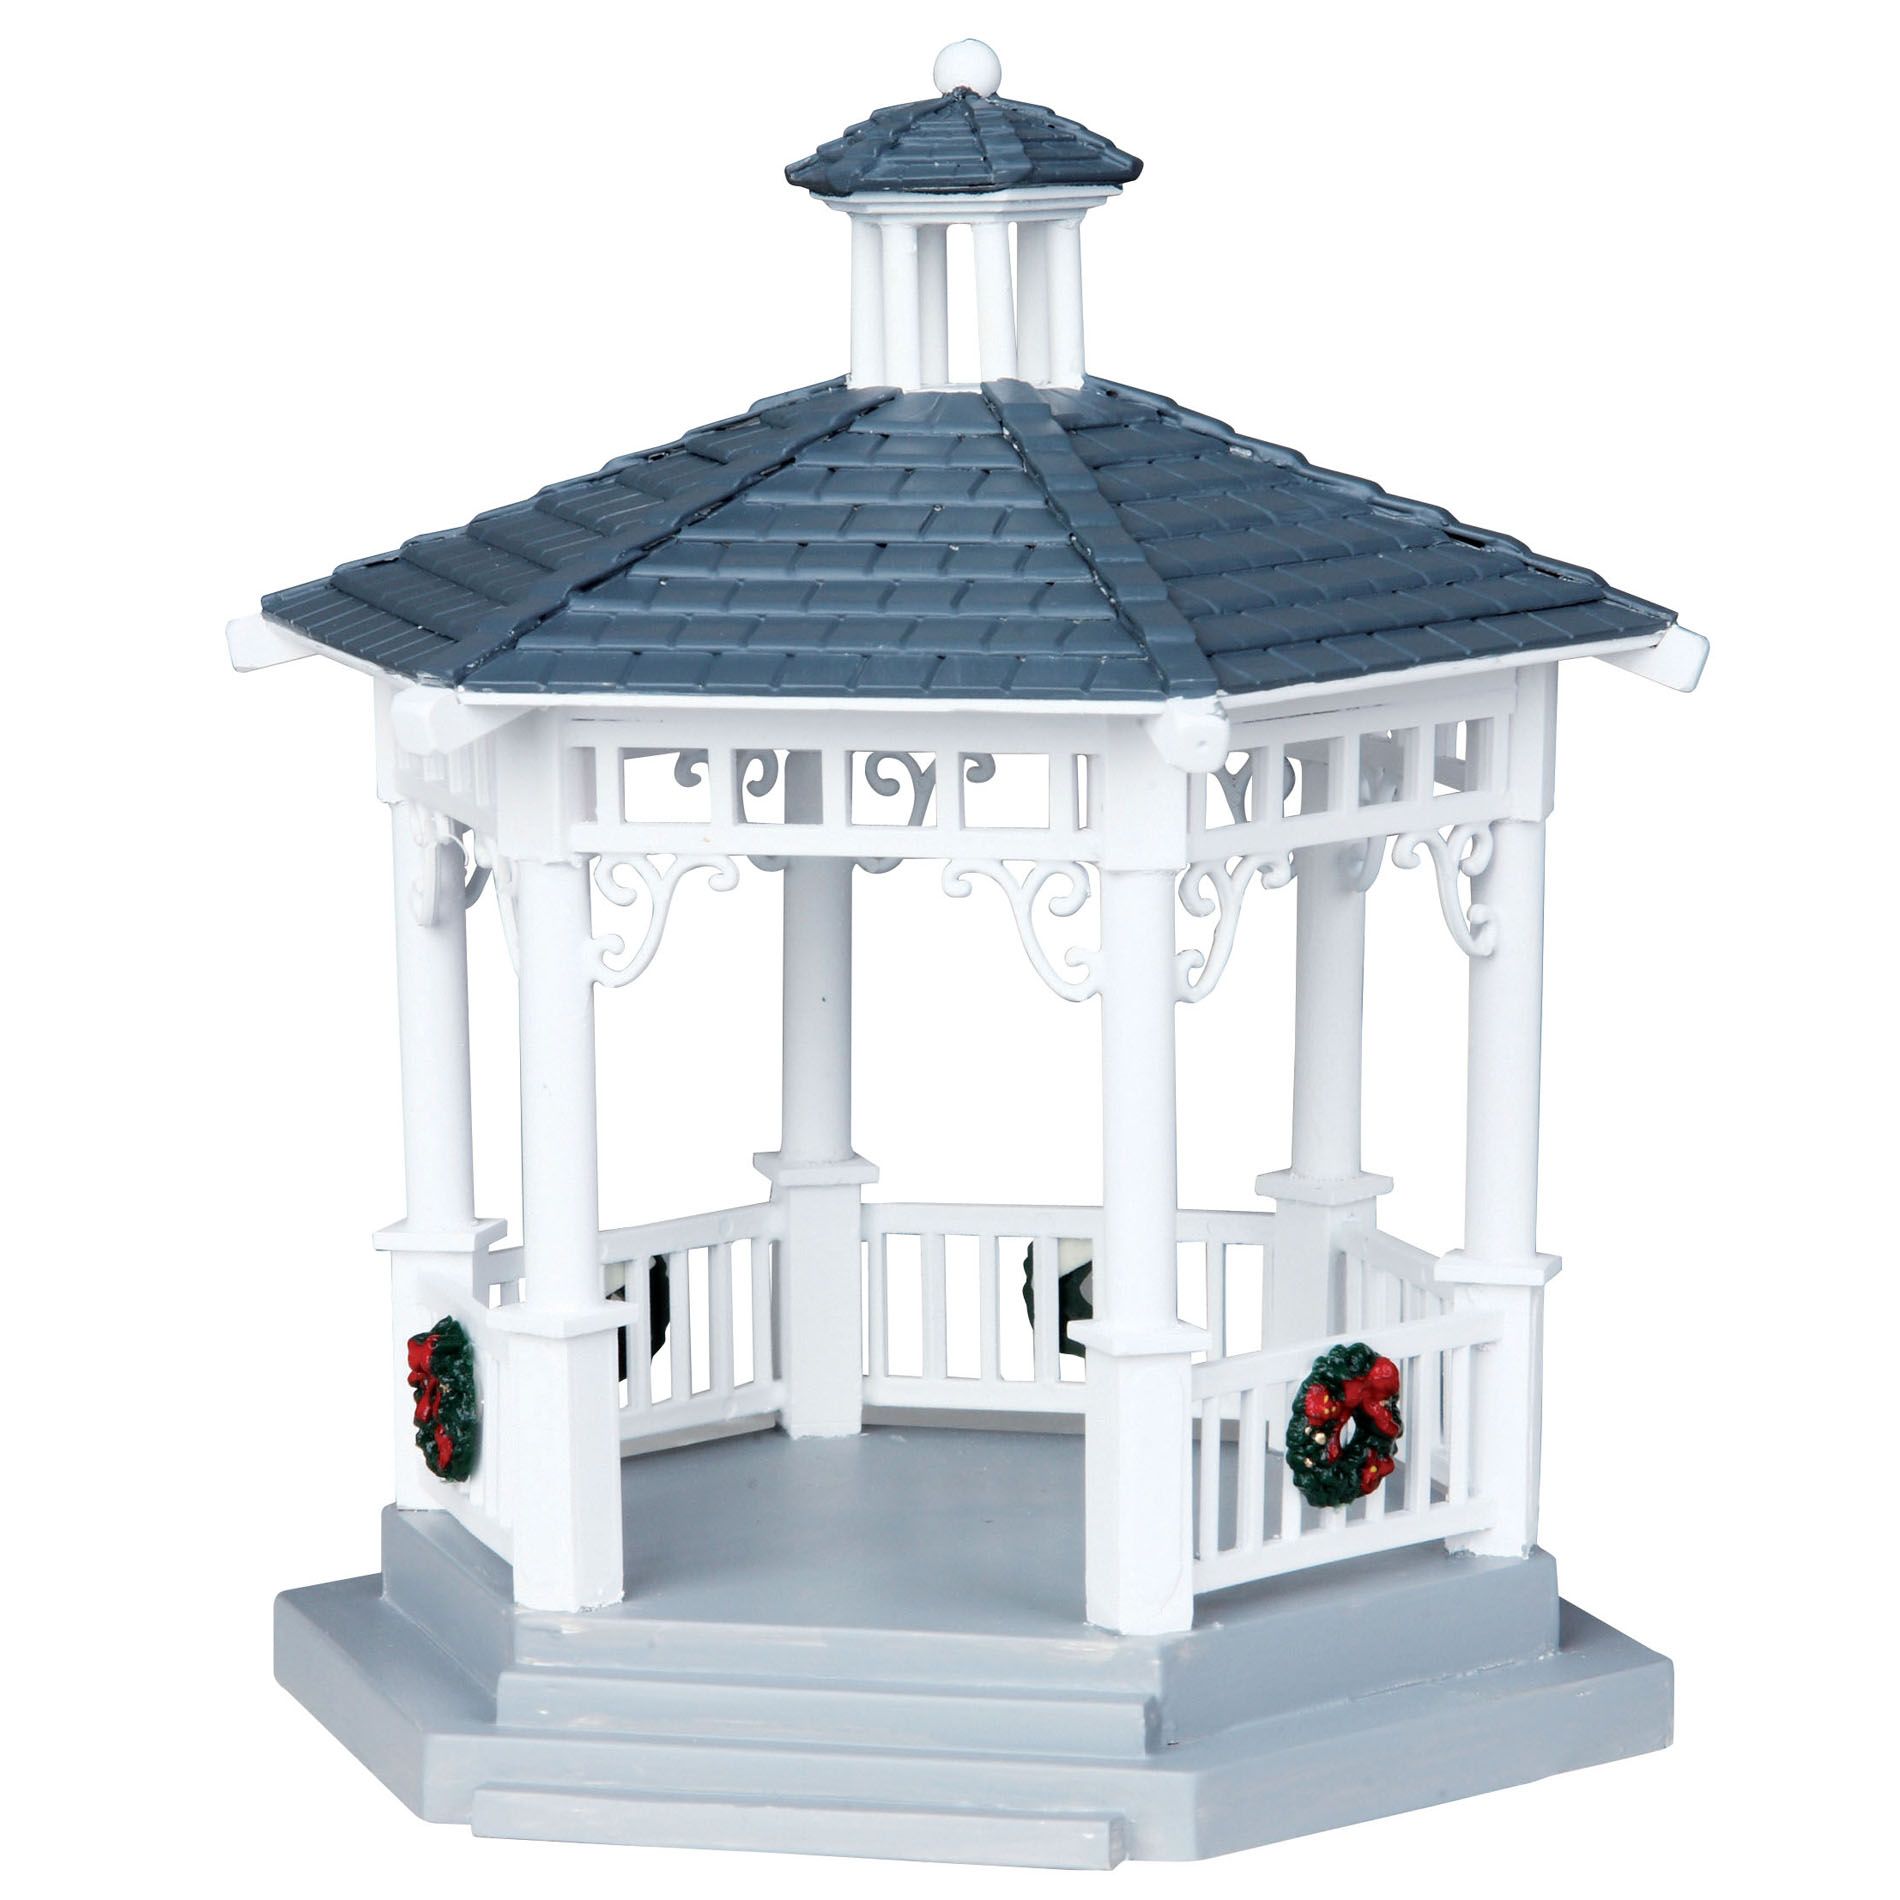 Lemax Village Collection Christmas Village Accessory - Plastic Gazebo With Decorations  Set Of 6